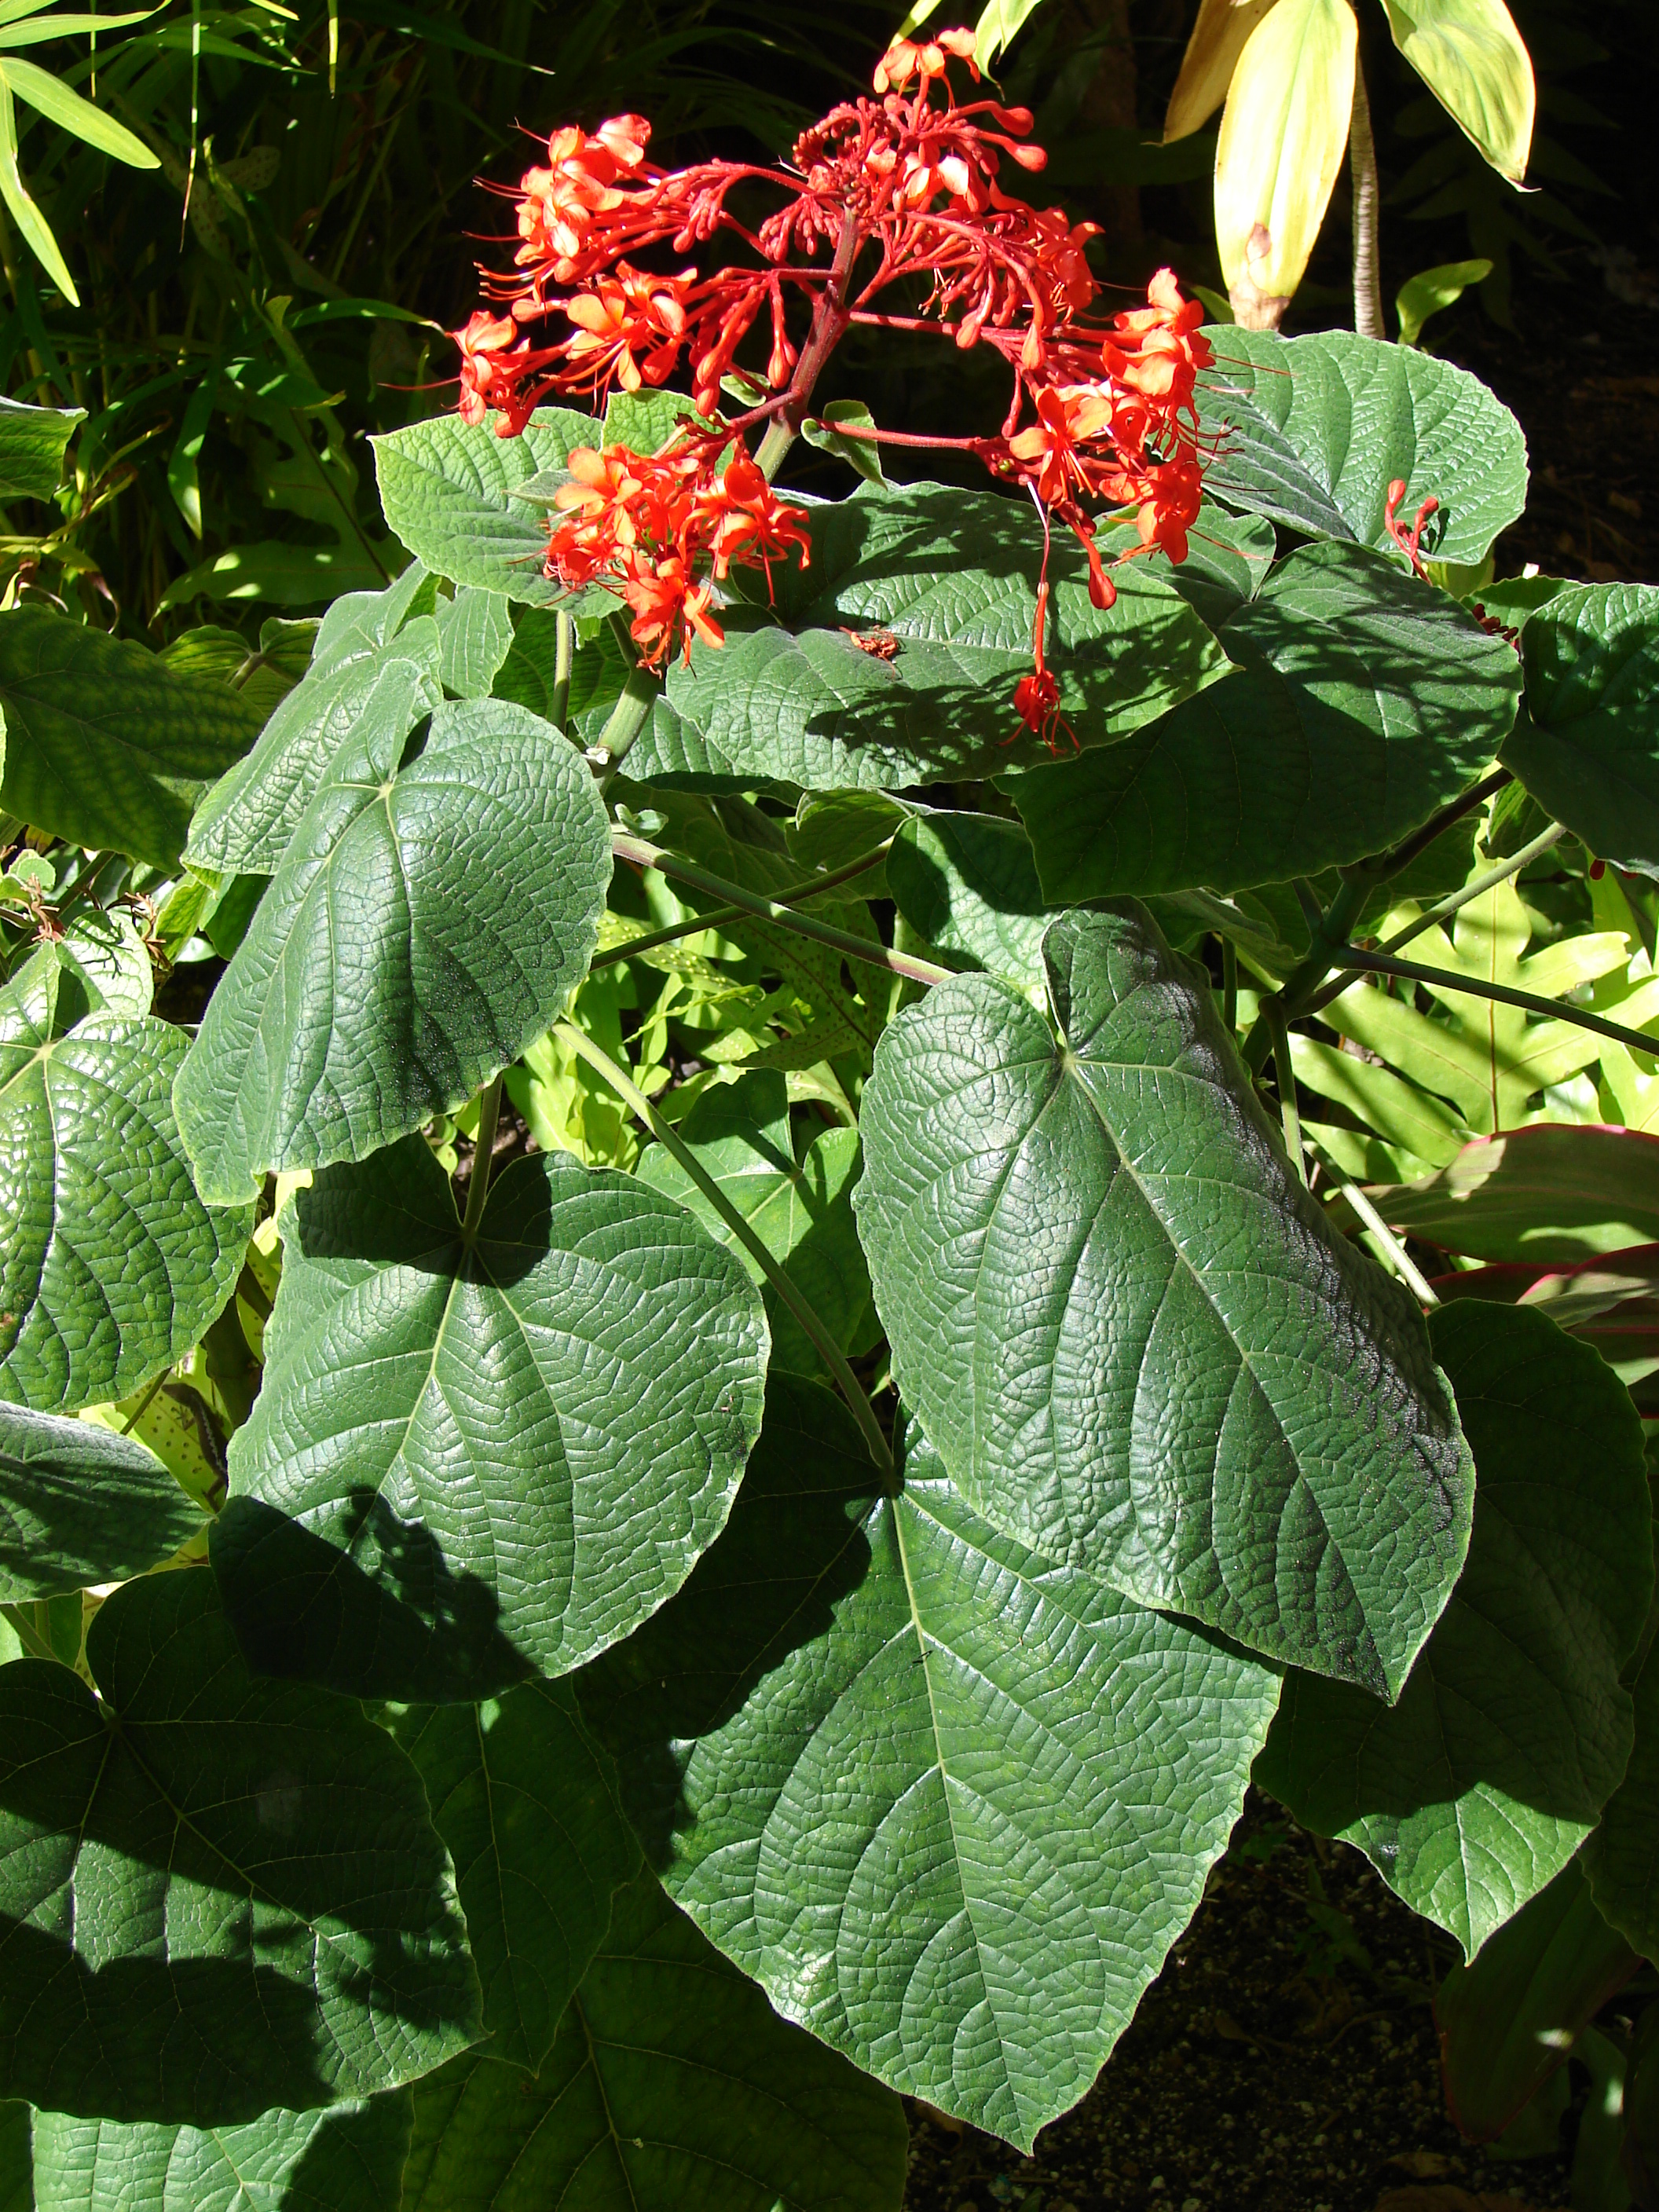 Terminal inflorescence and nearby heart shaped leaves